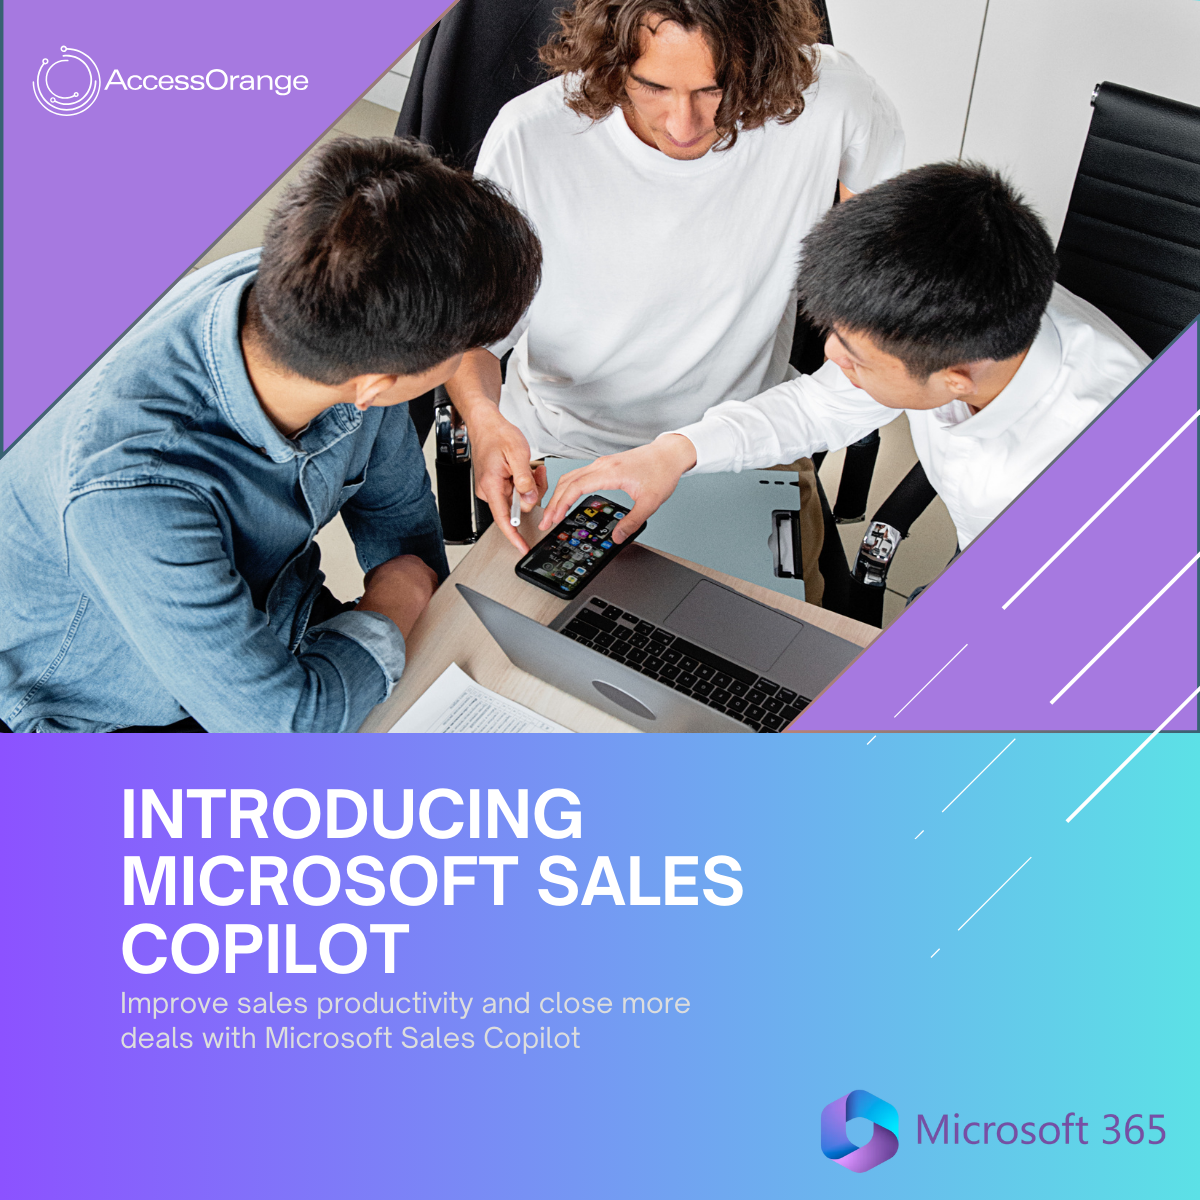 Unlocking the Power of Sales CoPilot in Microsoft Outlook